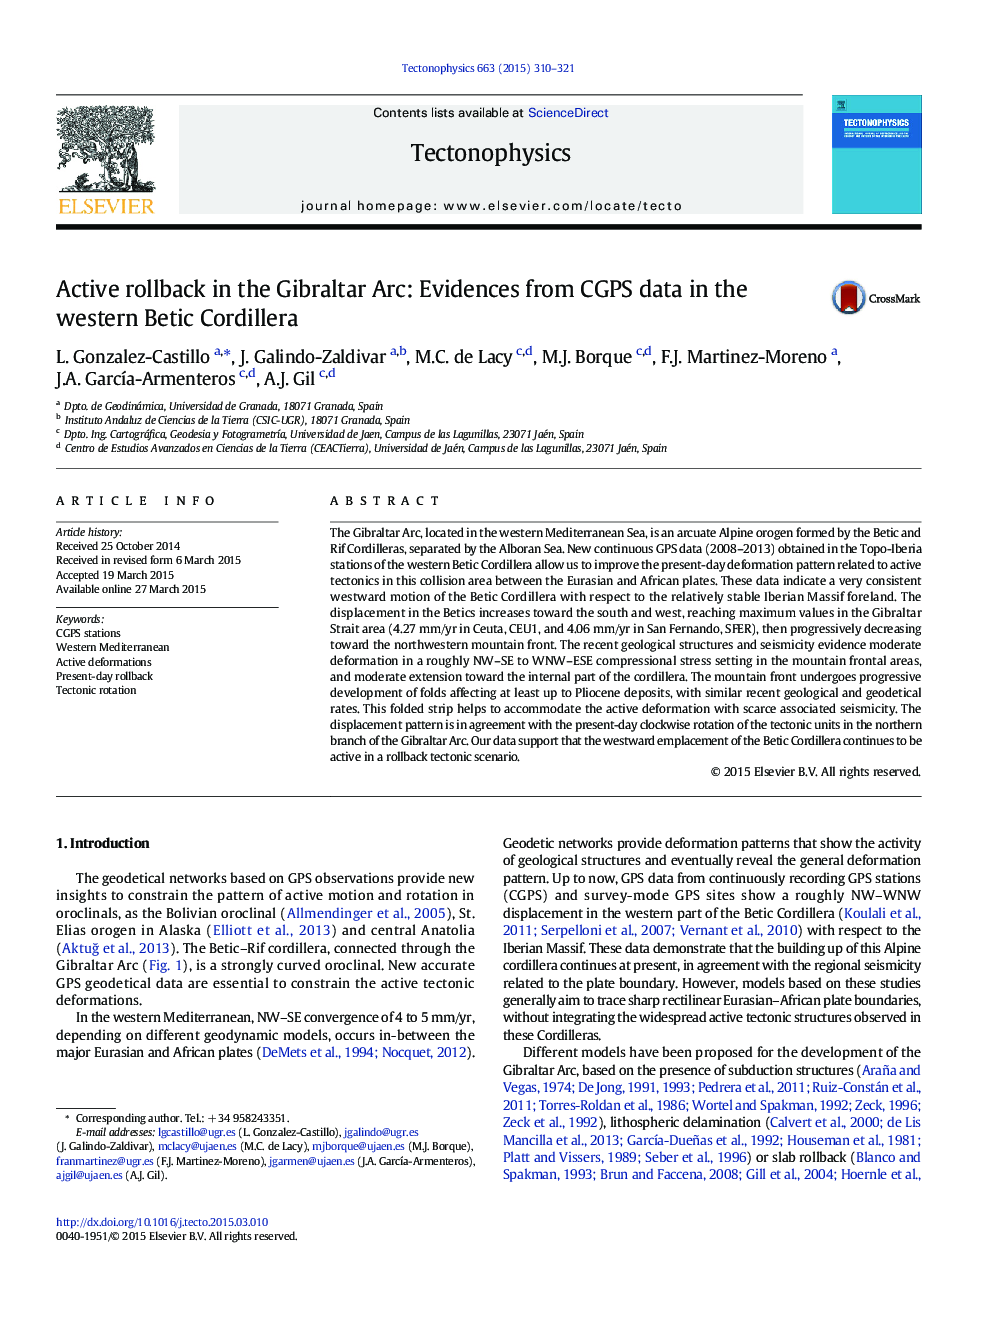 Active rollback in the Gibraltar Arc: Evidences from CGPS data in the western Betic Cordillera